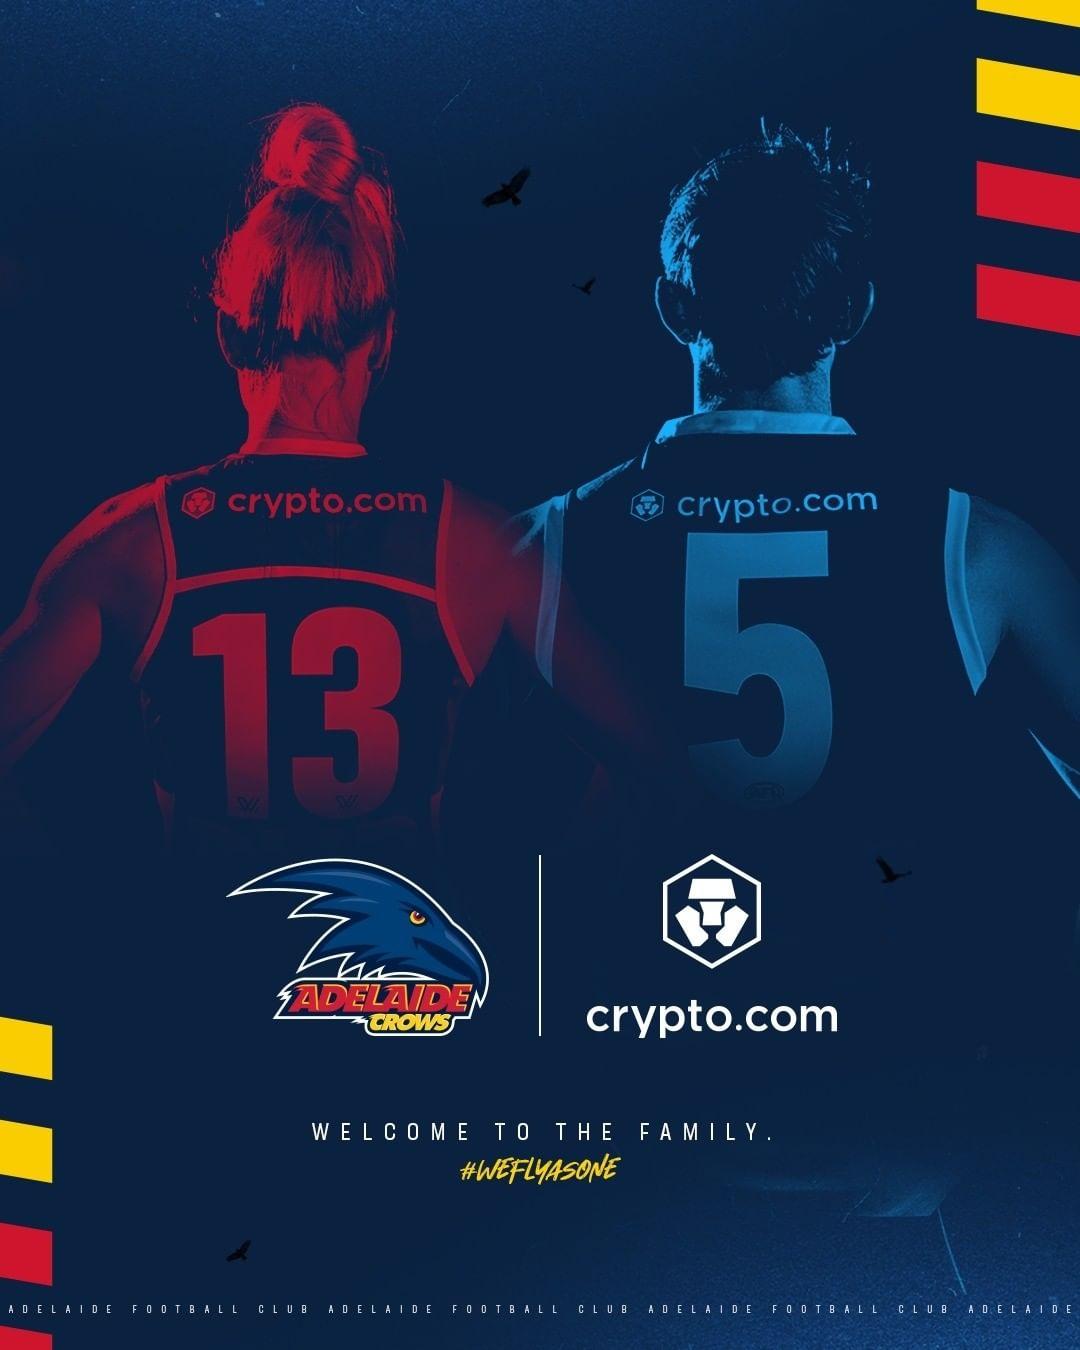 Welcome to the family, Crypto.com 🤝

Full details via link in our story.
#weflyasone